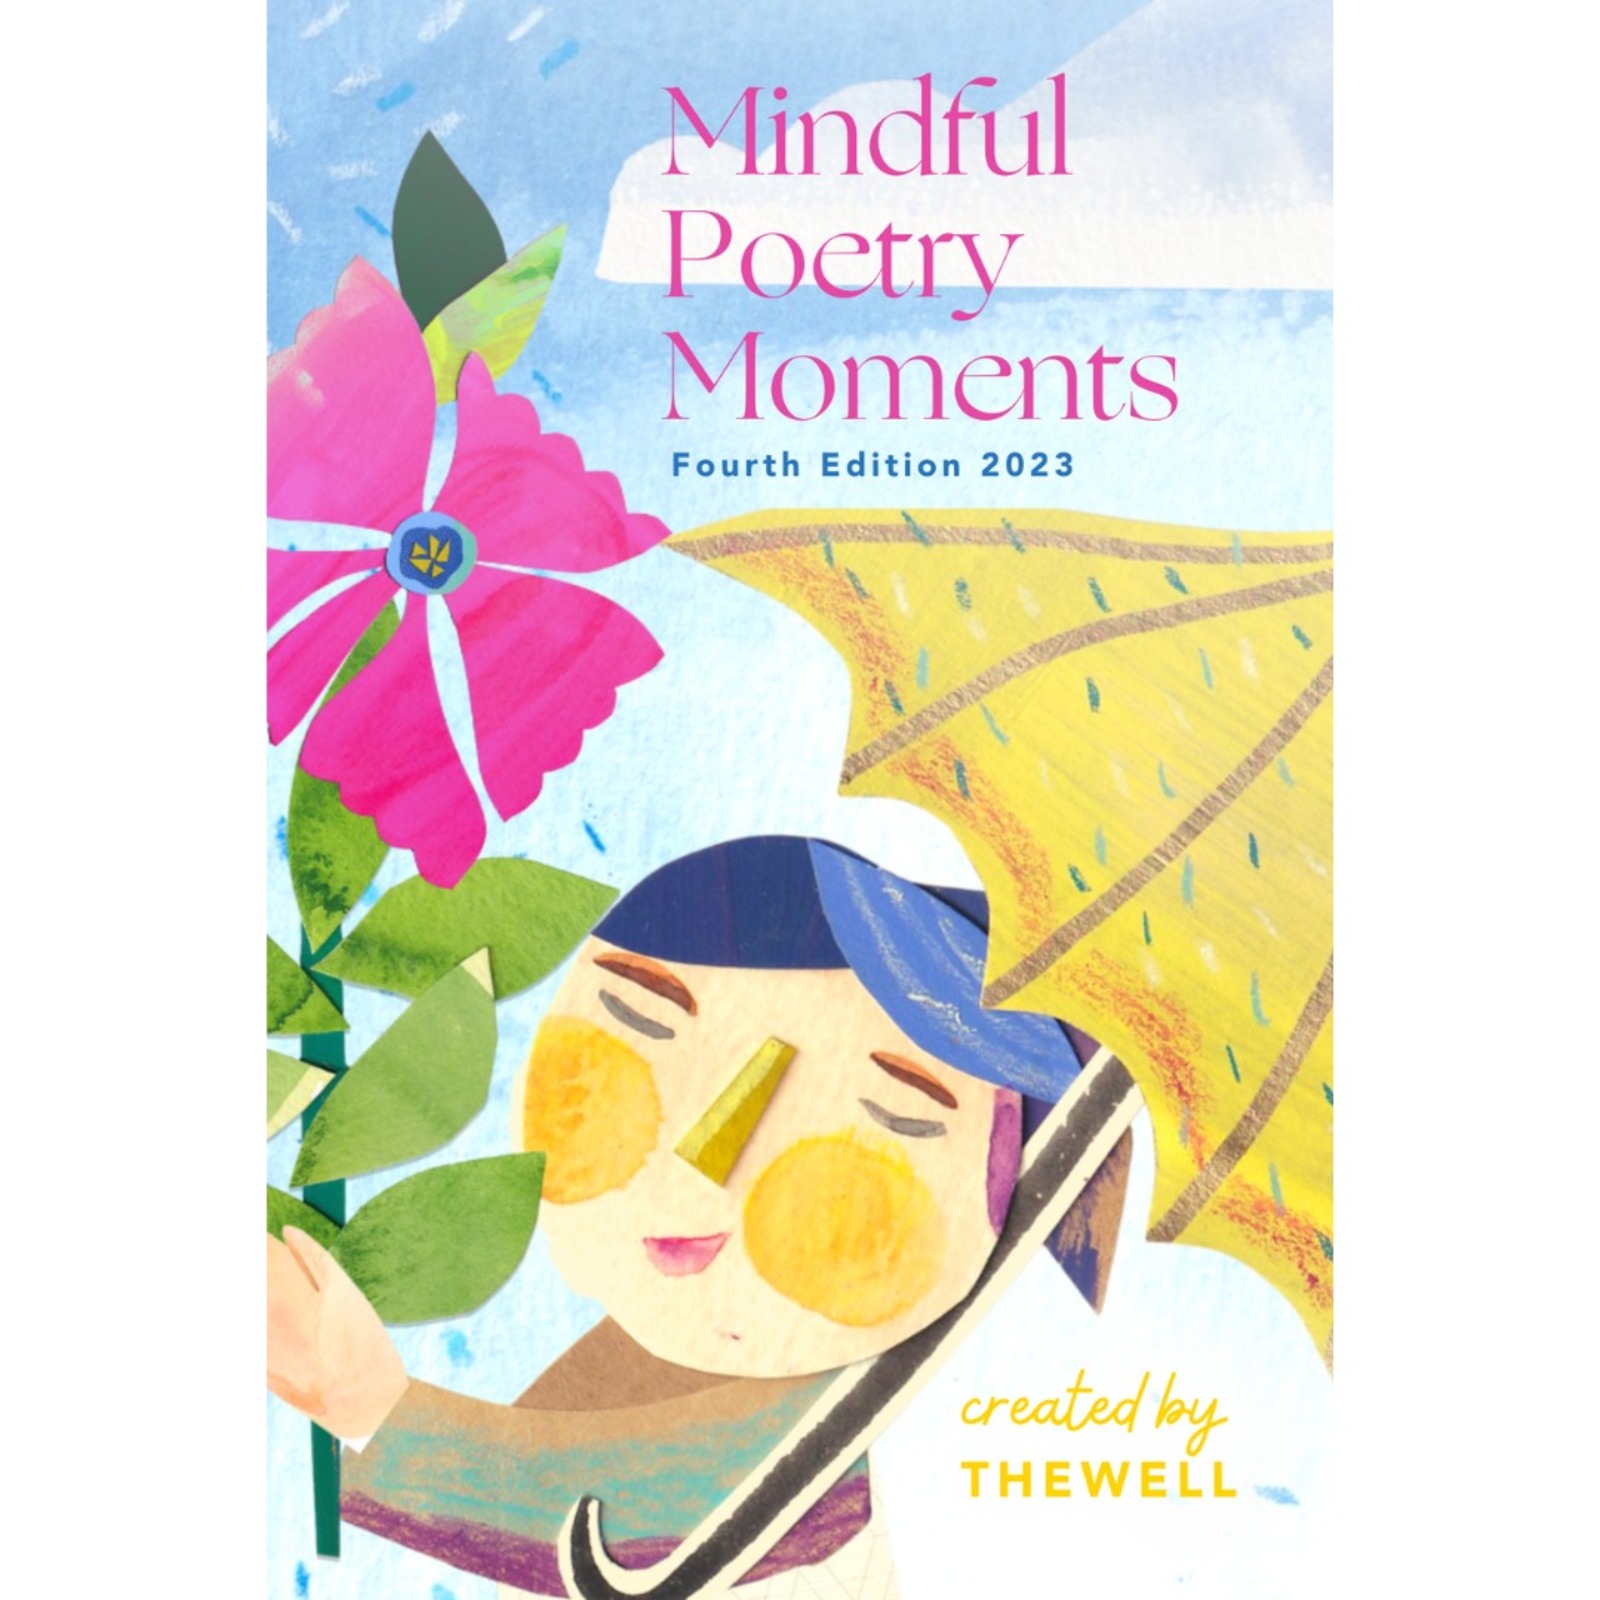 Mindful Poetry Moments 4th Edition (2023)